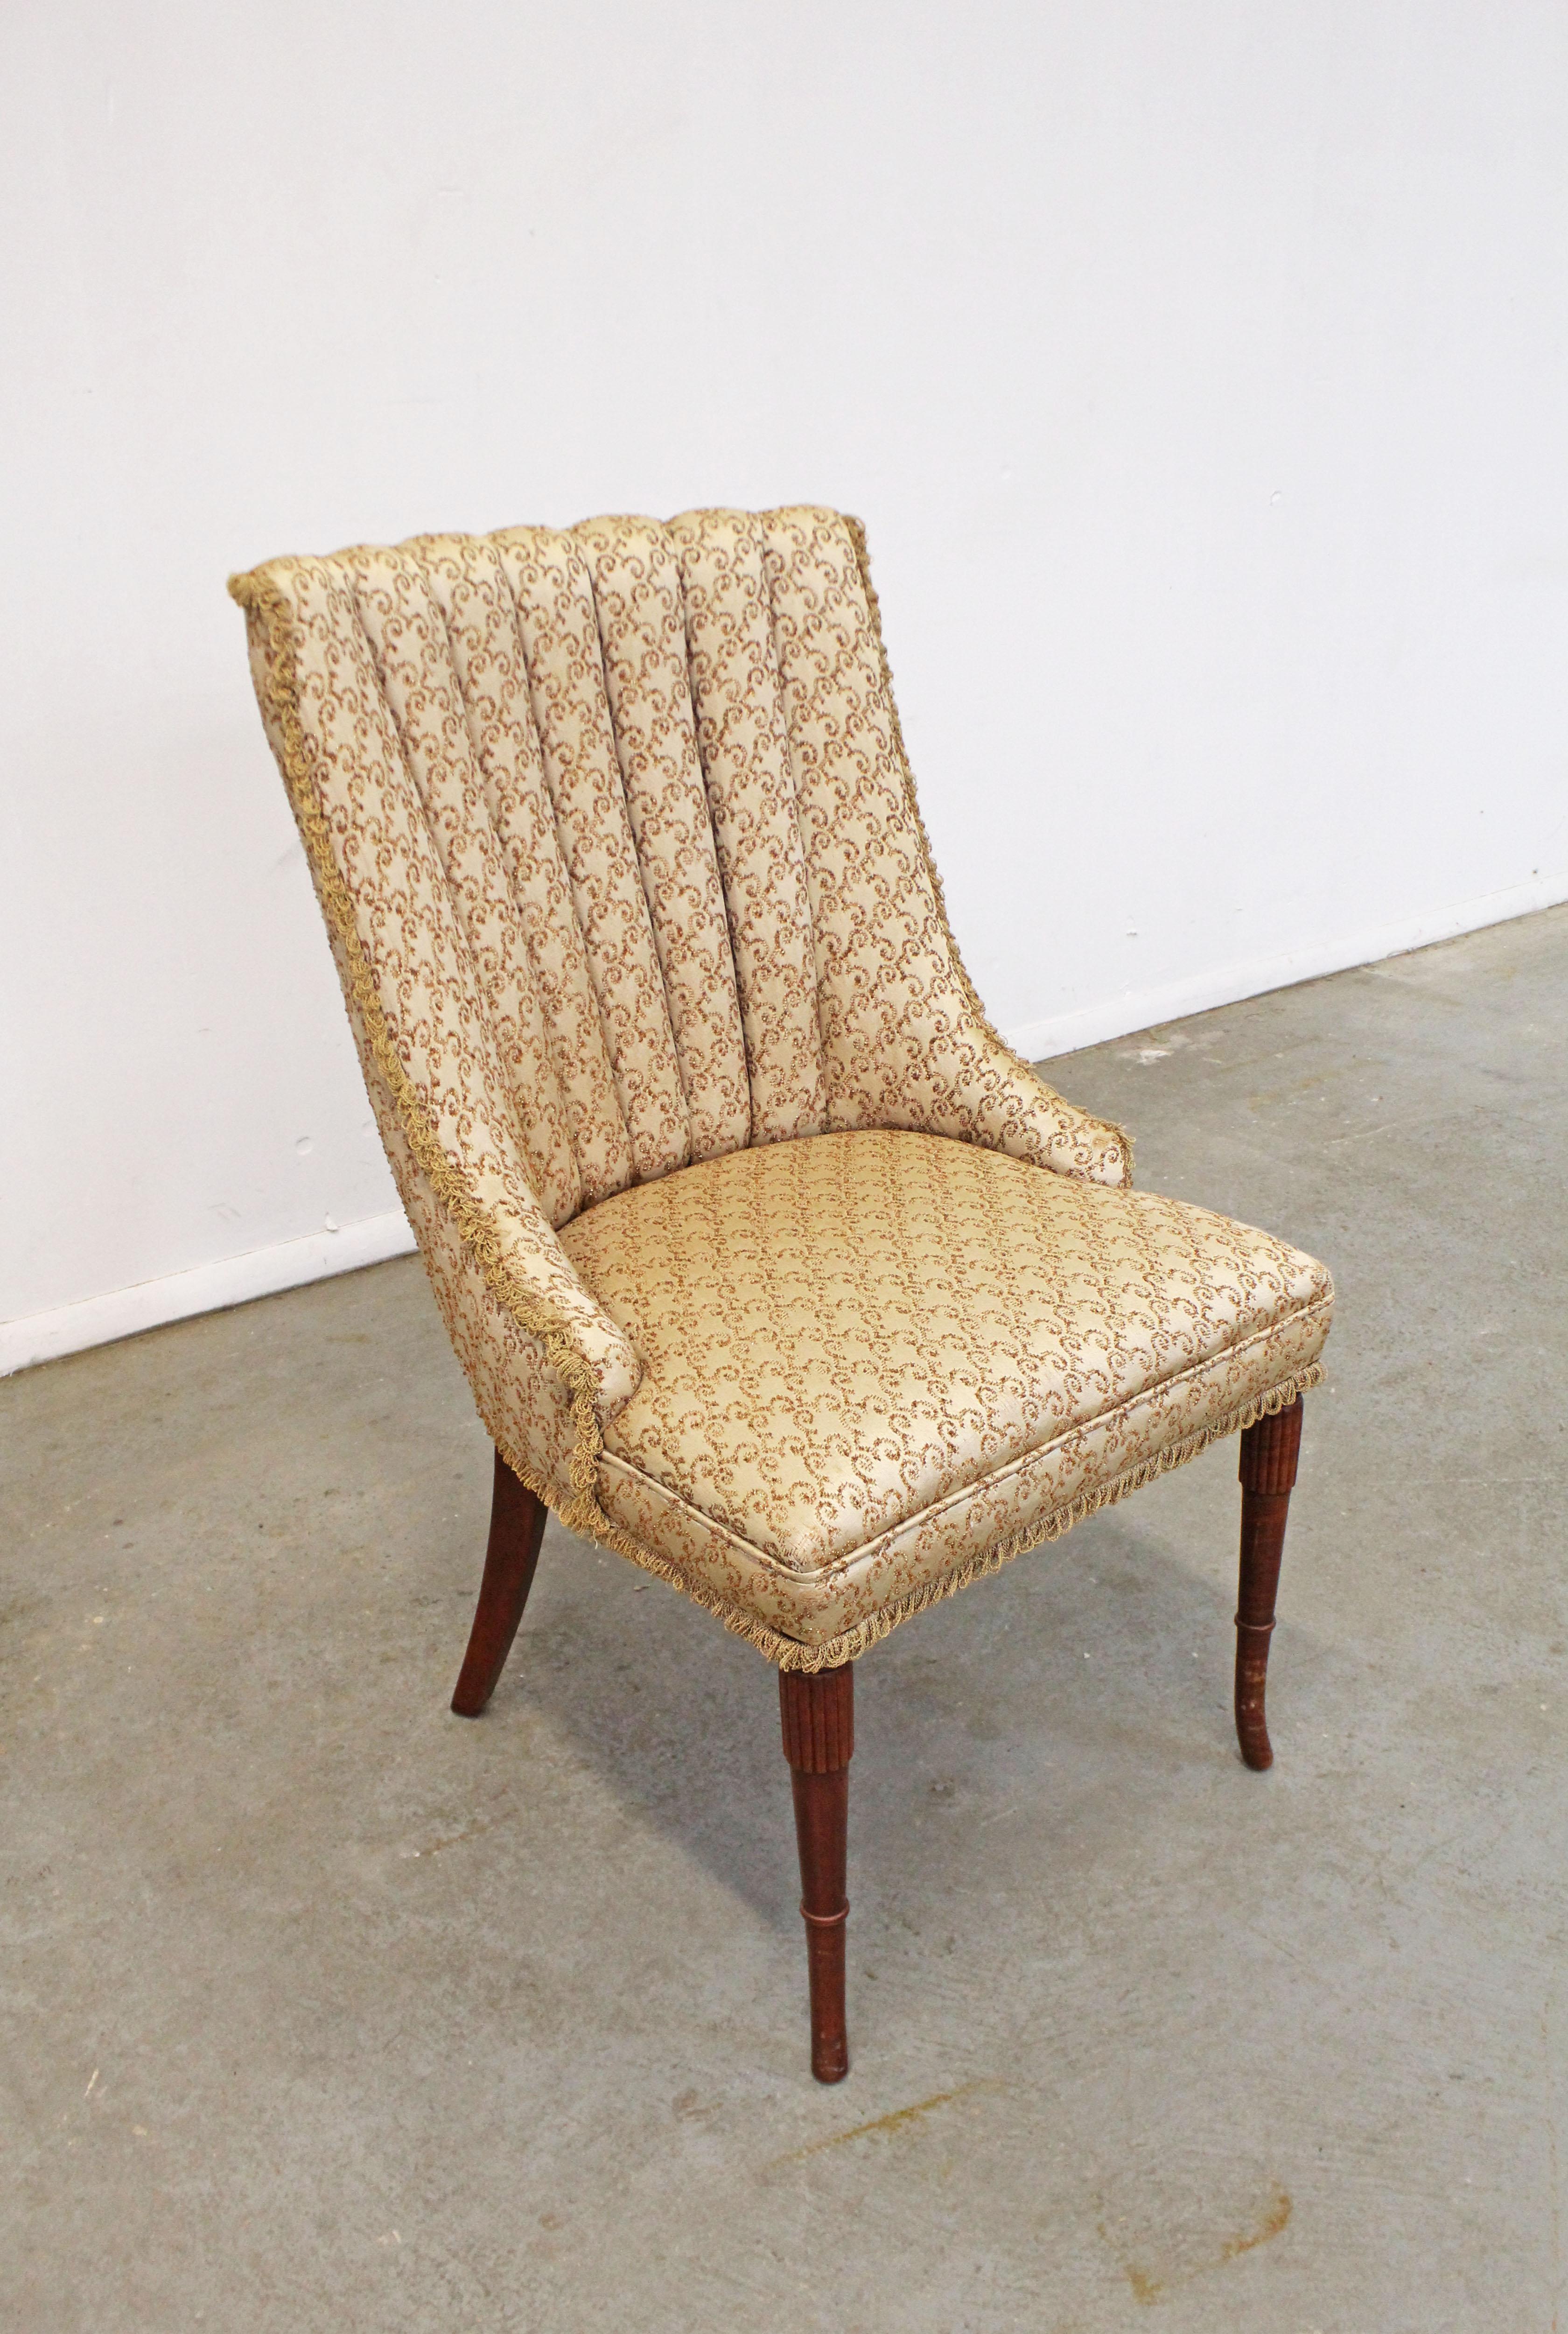 Offered is a vintage French style ladies parlor chair. Features fluted legs and gold upholstery. It is in good, structurally sound condition with minor age wear including small scuff/scratch marks on legs and slight tearing in fabric. Please review